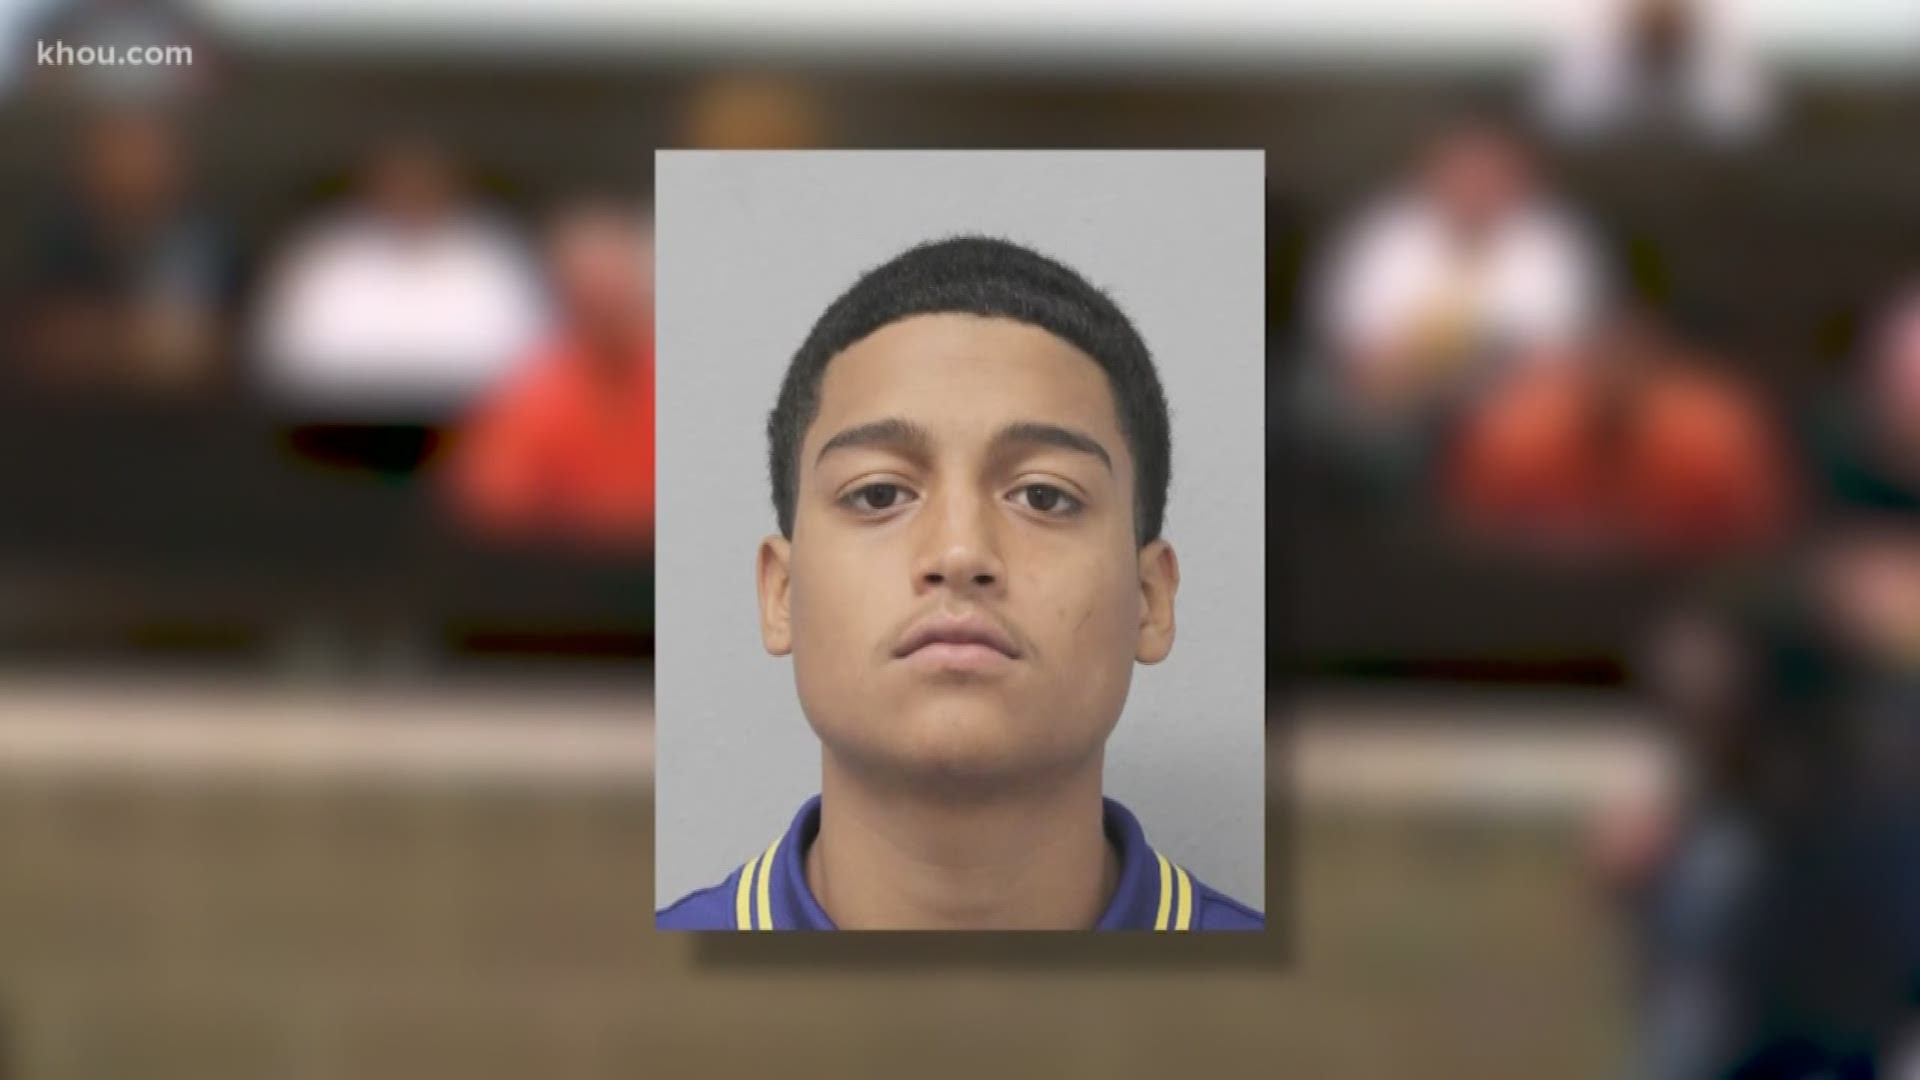 The teenage suspect in a recent road rage shooting that seriously injured two small children appeared in PC court Monday morning after facing several aggravated assault charges.